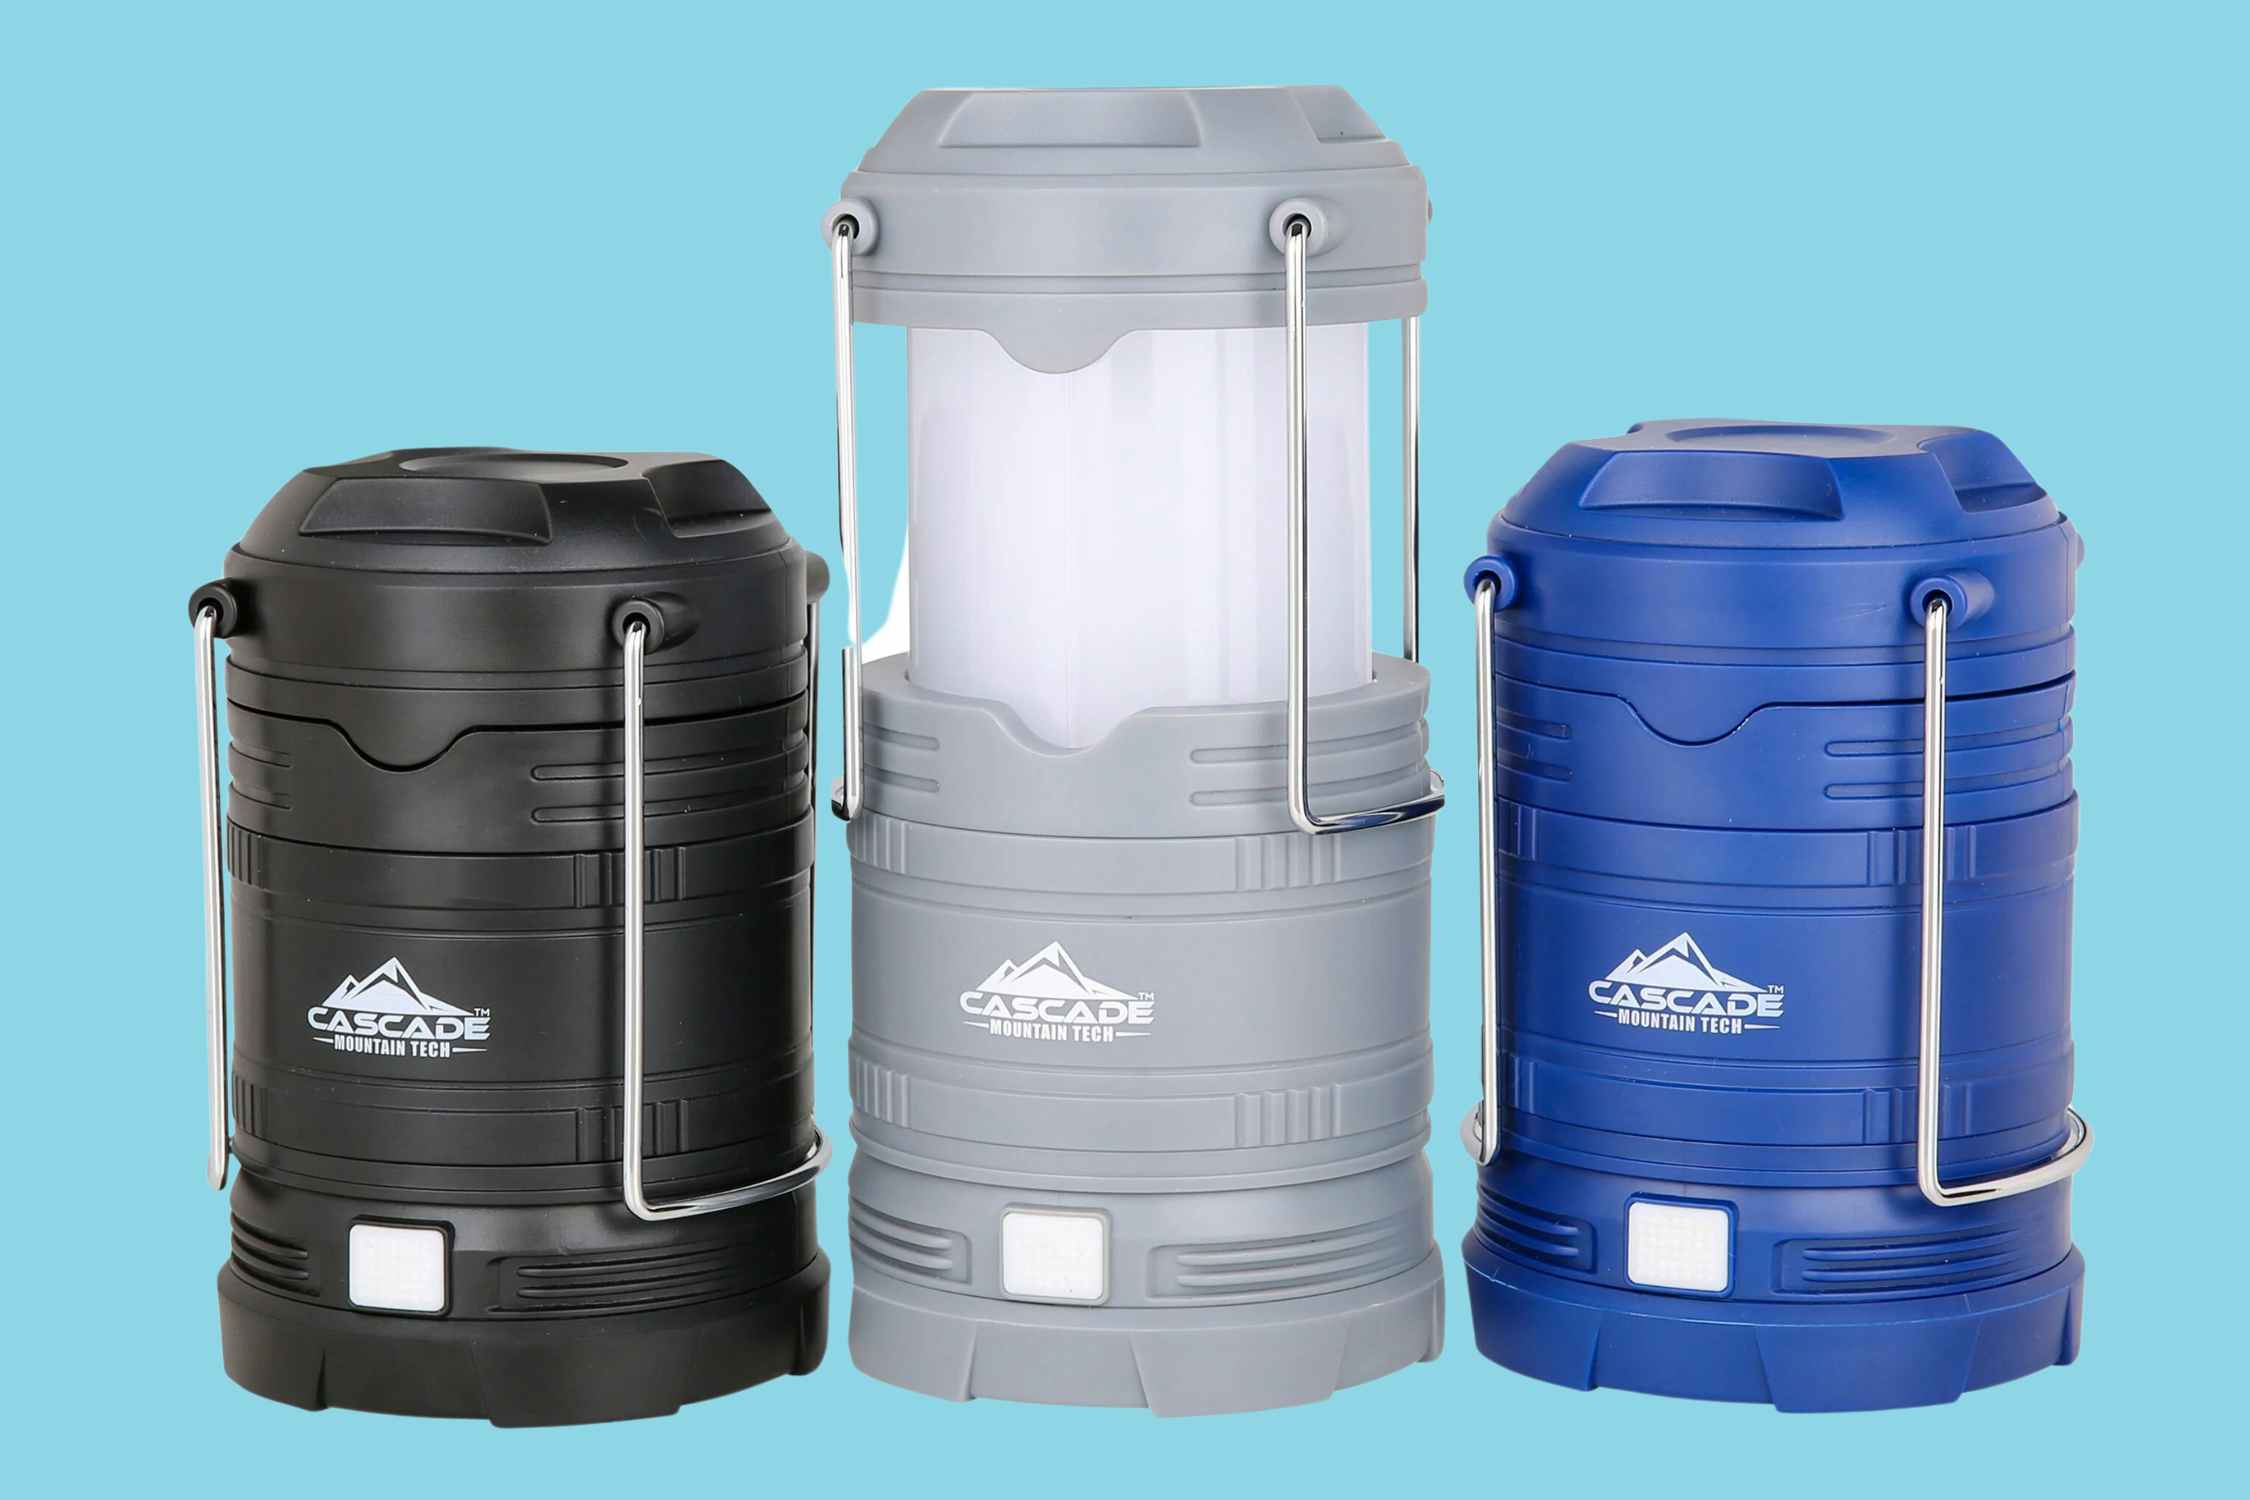 Camping Lanterns 3-Pack, Only $6.30 on Walmart.com